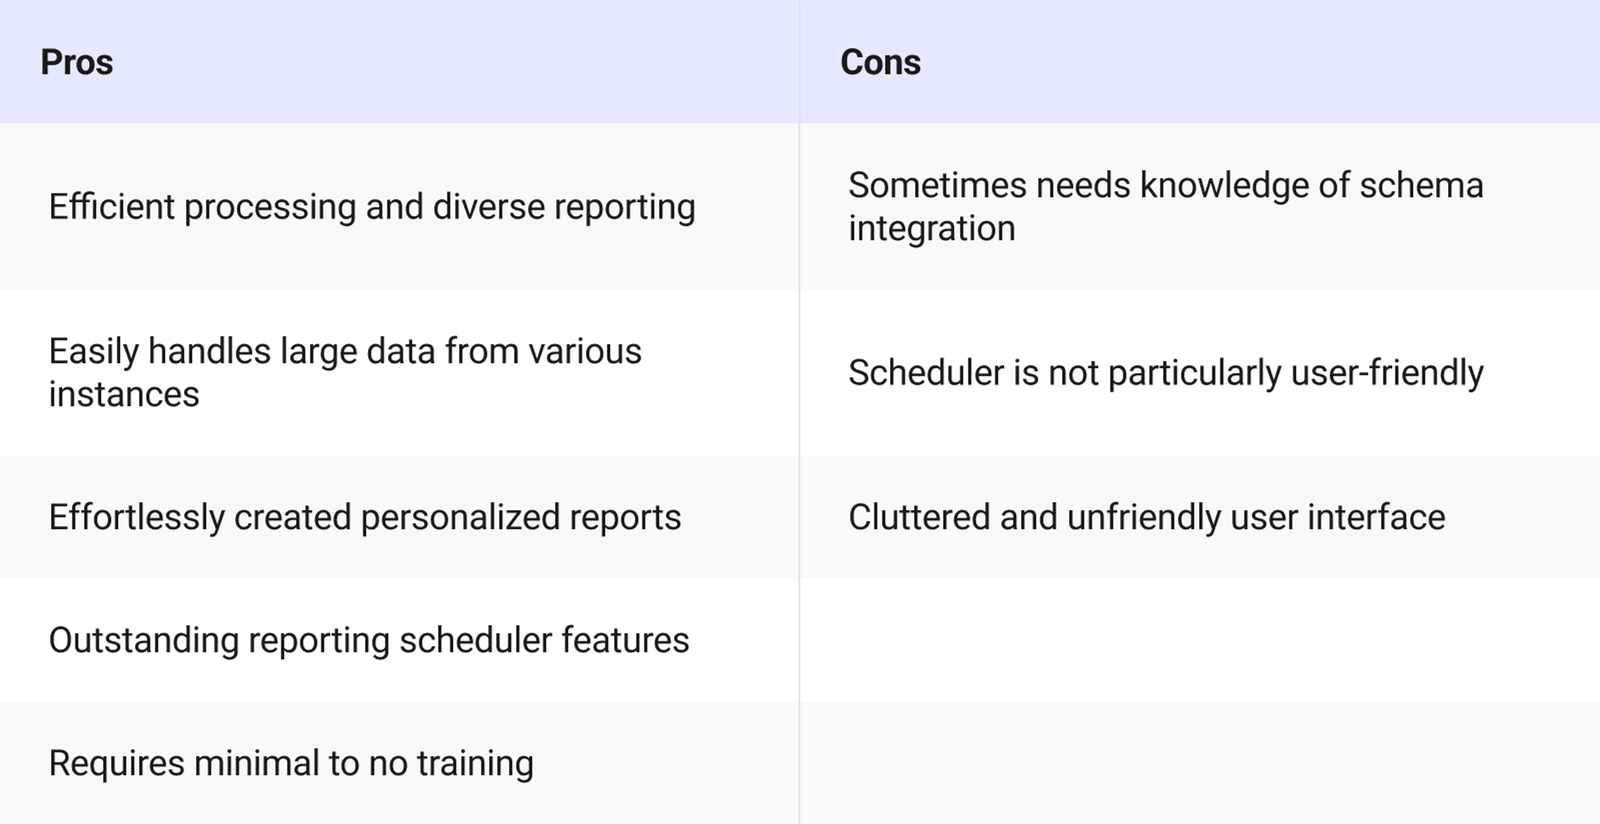 SAP BusinessObjects Data Analytics Tool Pros and Cons